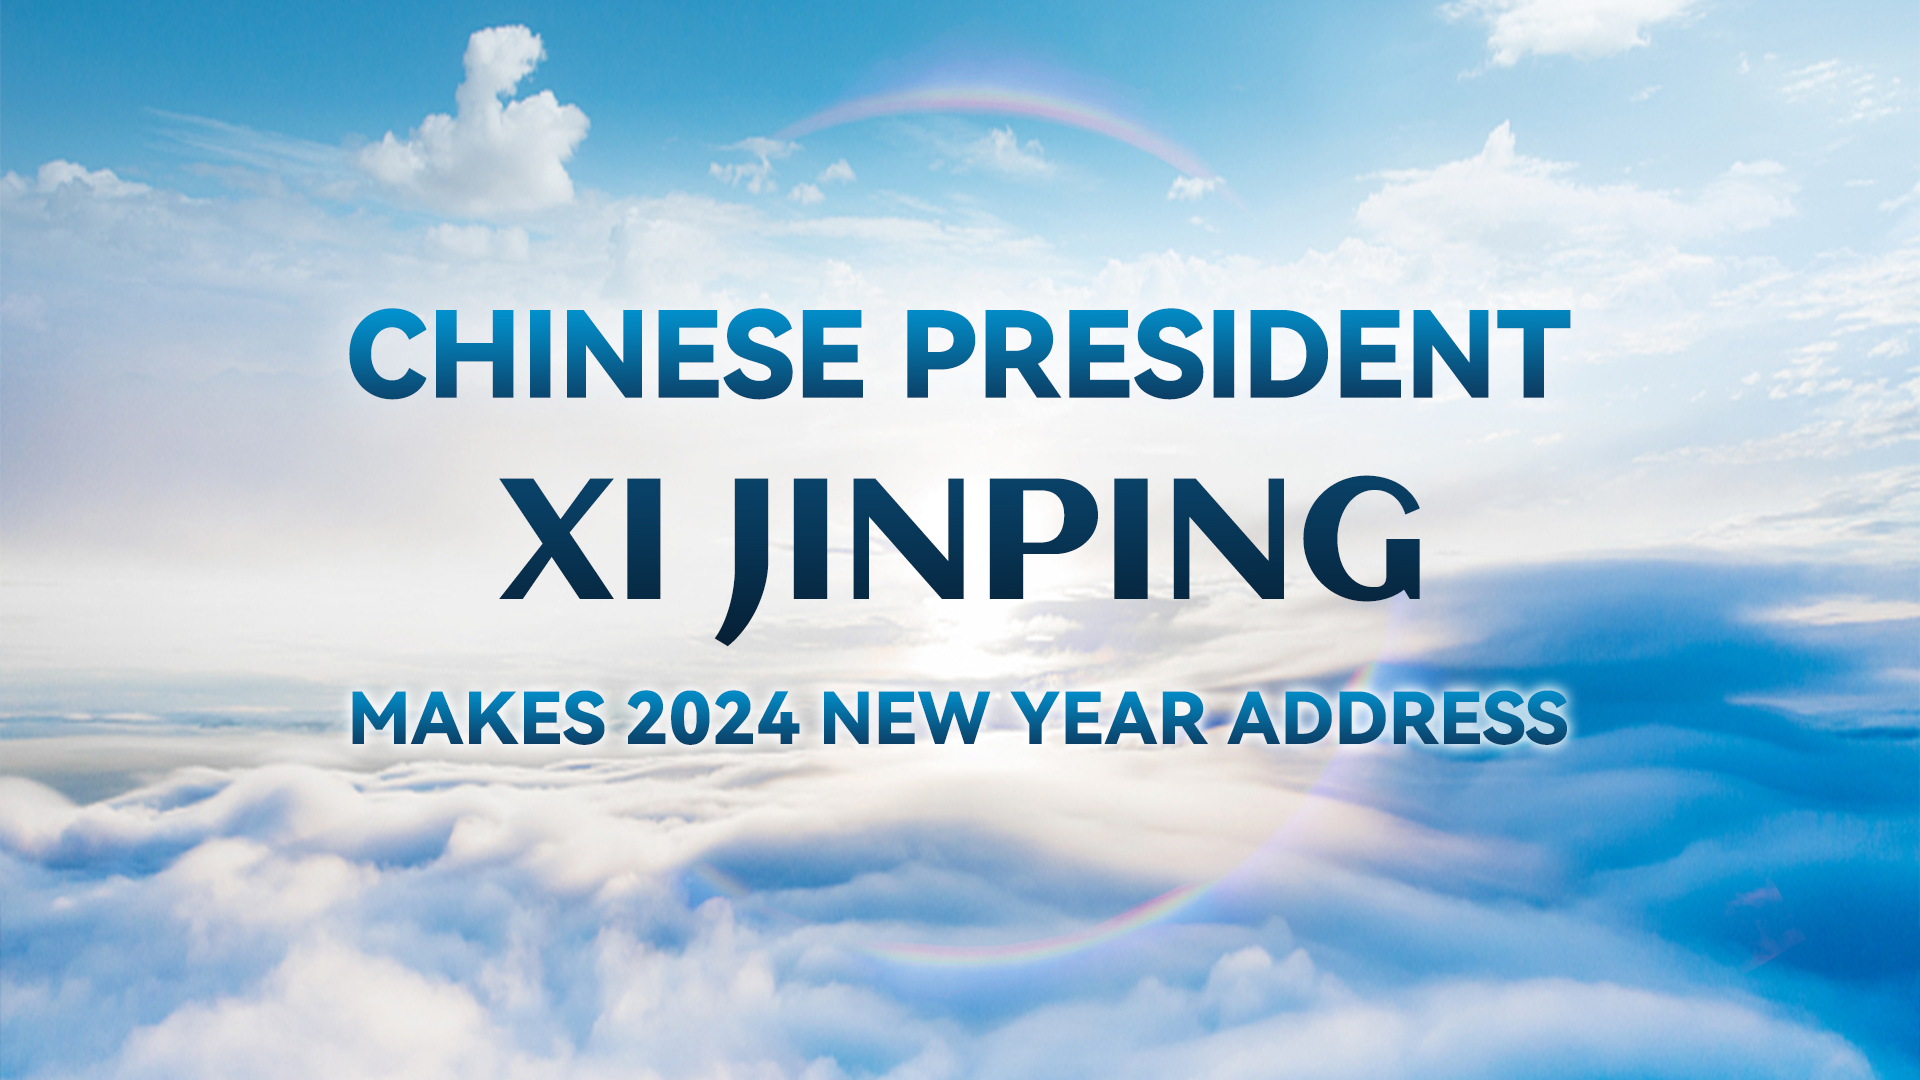 Live: Chinese President Xi Jinping makes 2024 New Year Address